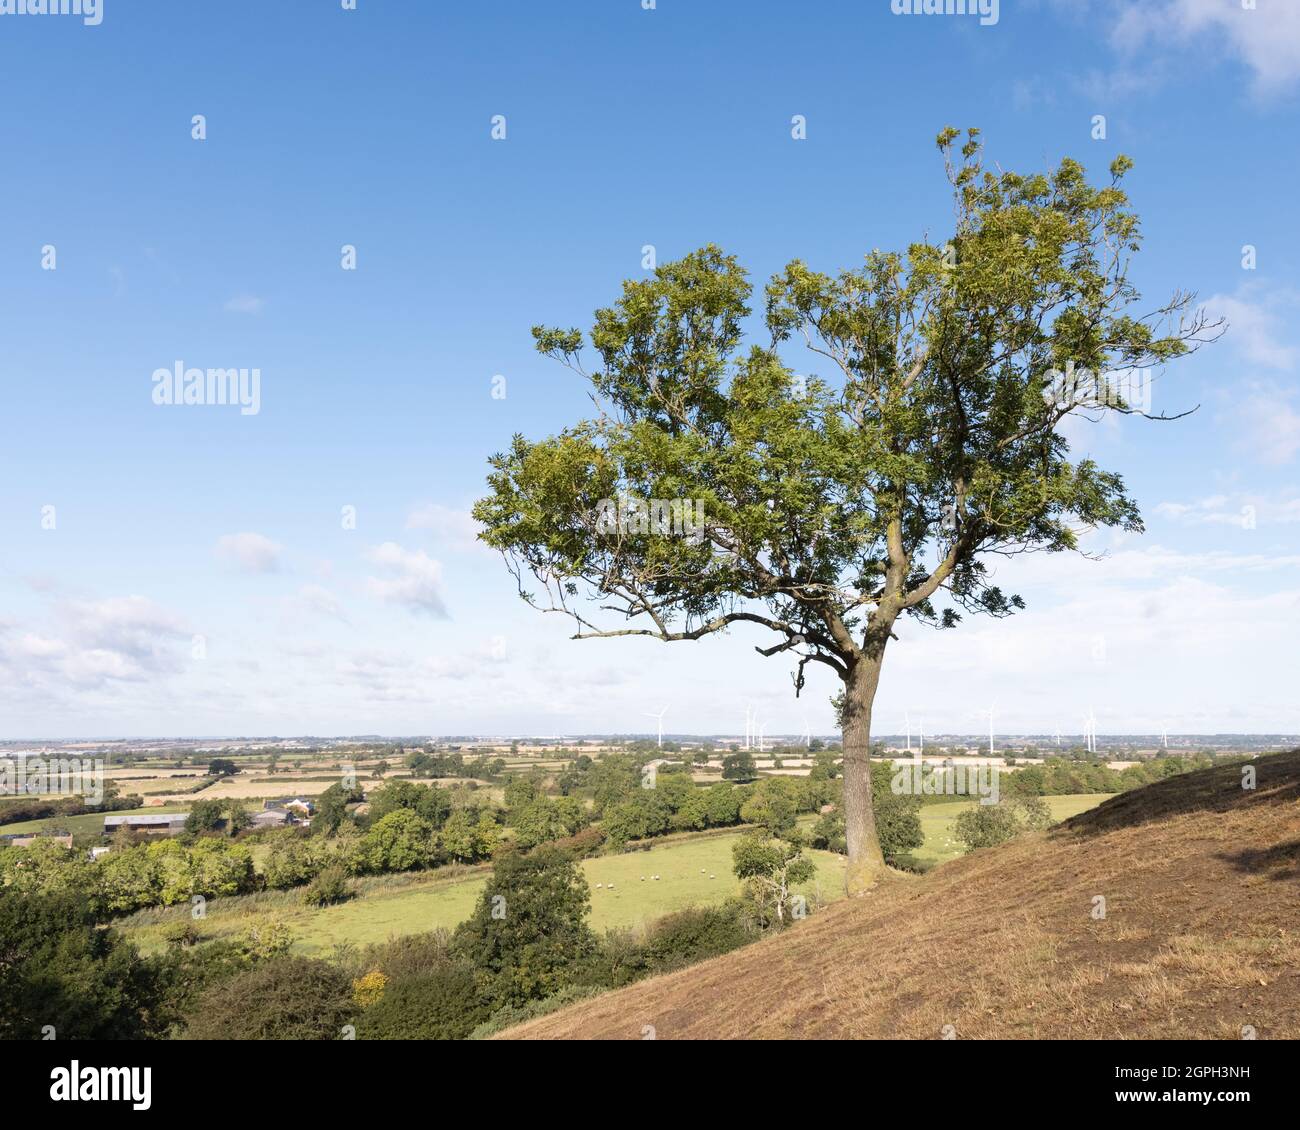 Crick, Northamptonshire, UK, September 29th 2021: A lone tree stands on Crack's Hill, an isolated hill in the Northamptonshire countryside. Stock Photo